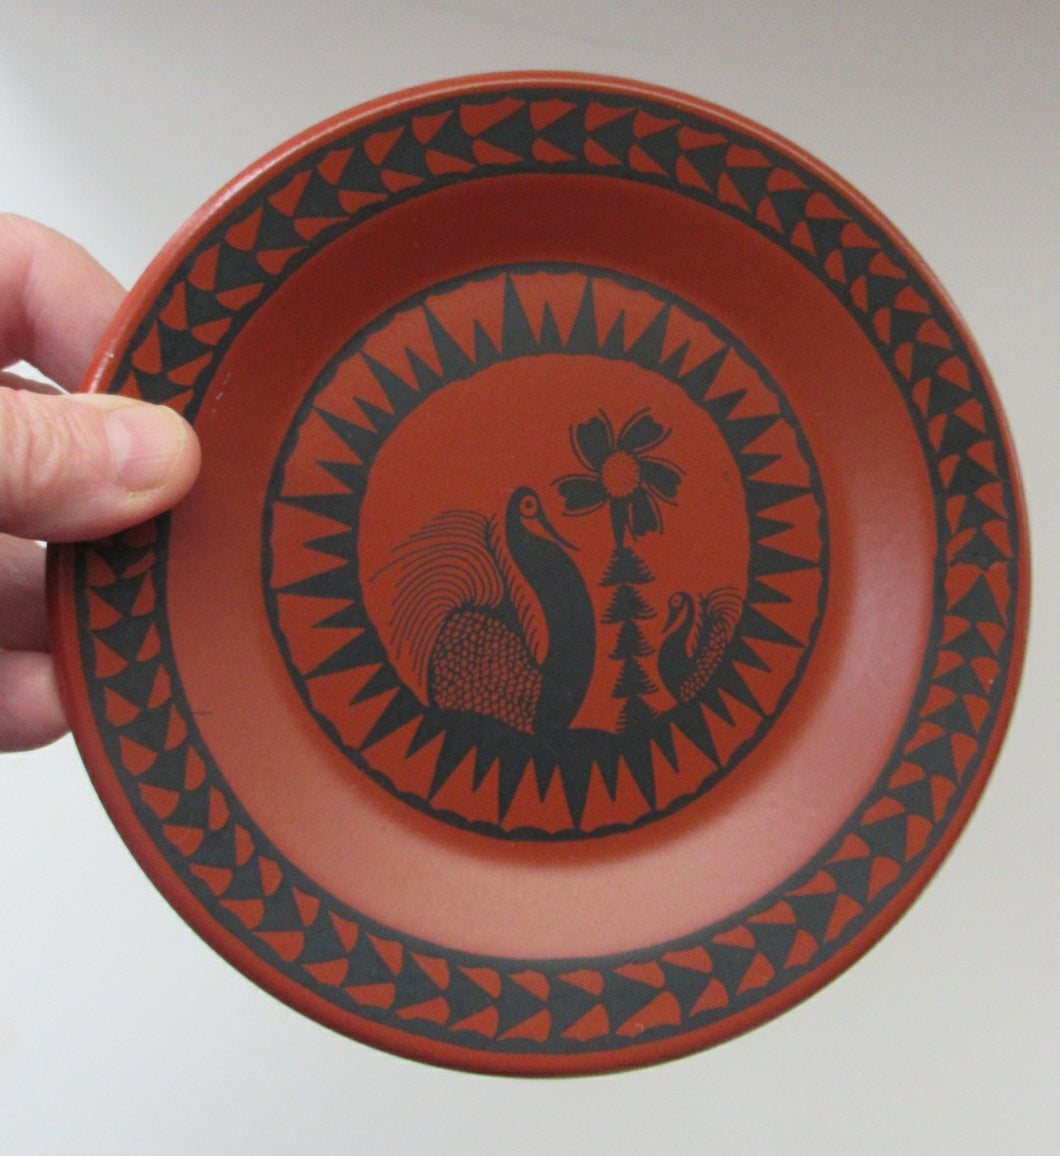 1960s Scottie Wilson Small Plate or Saucer Terracotta 6  1/4 inches